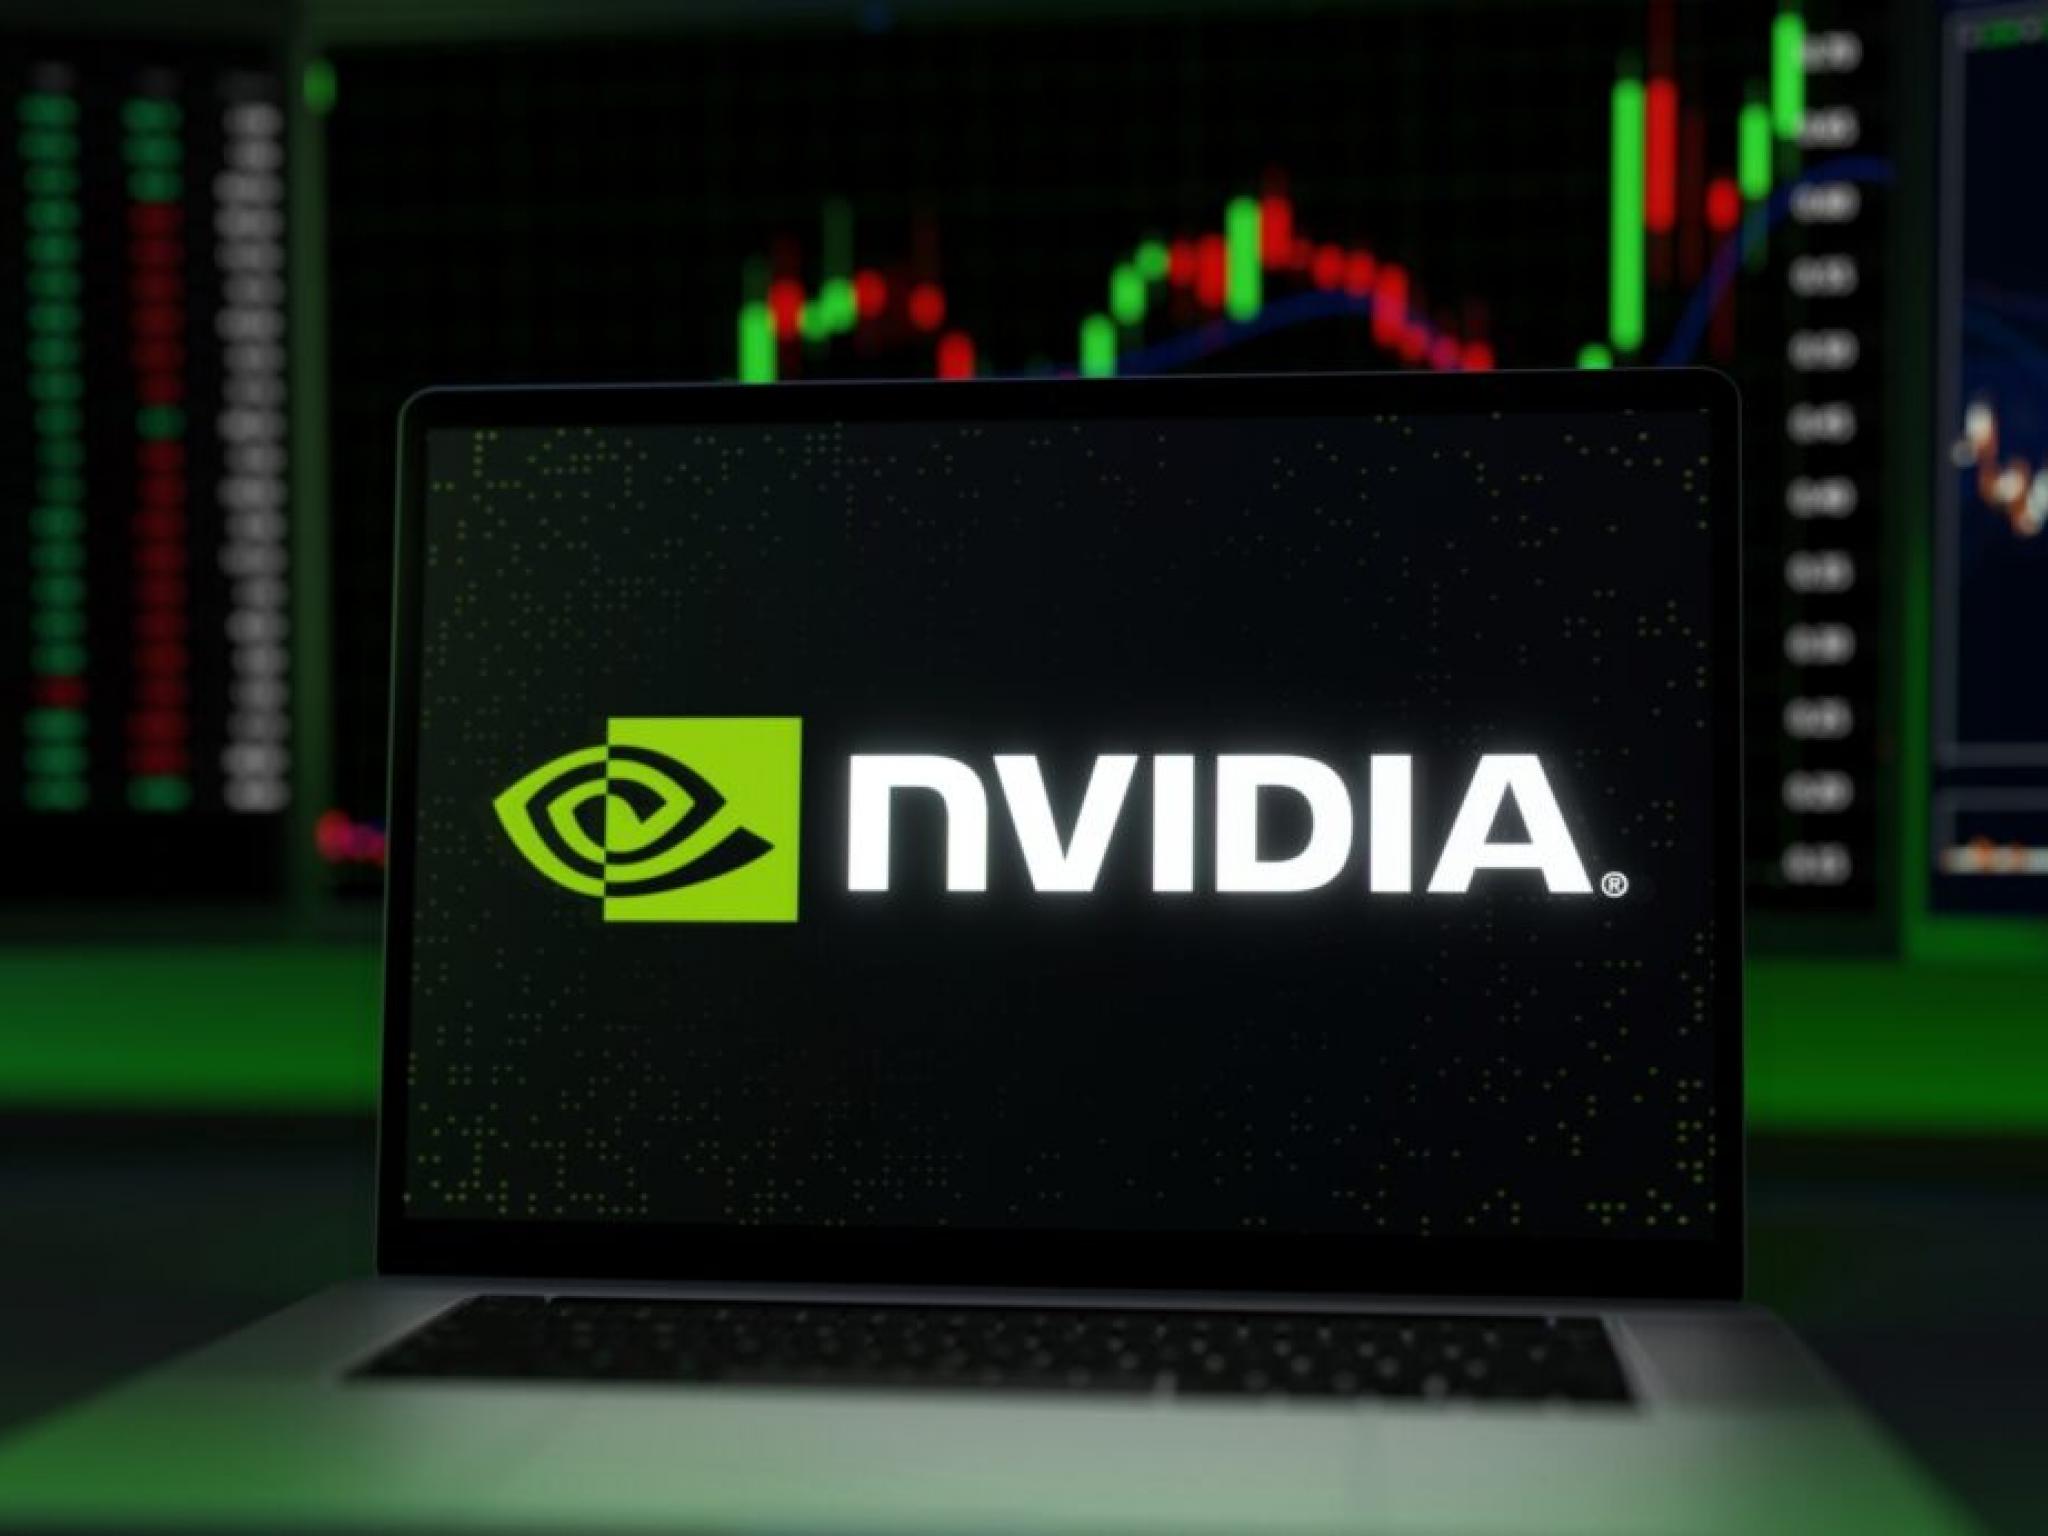  nvidia-to-rally-more-than-19-here-are-10-top-analyst-forecasts-for-tuesday 